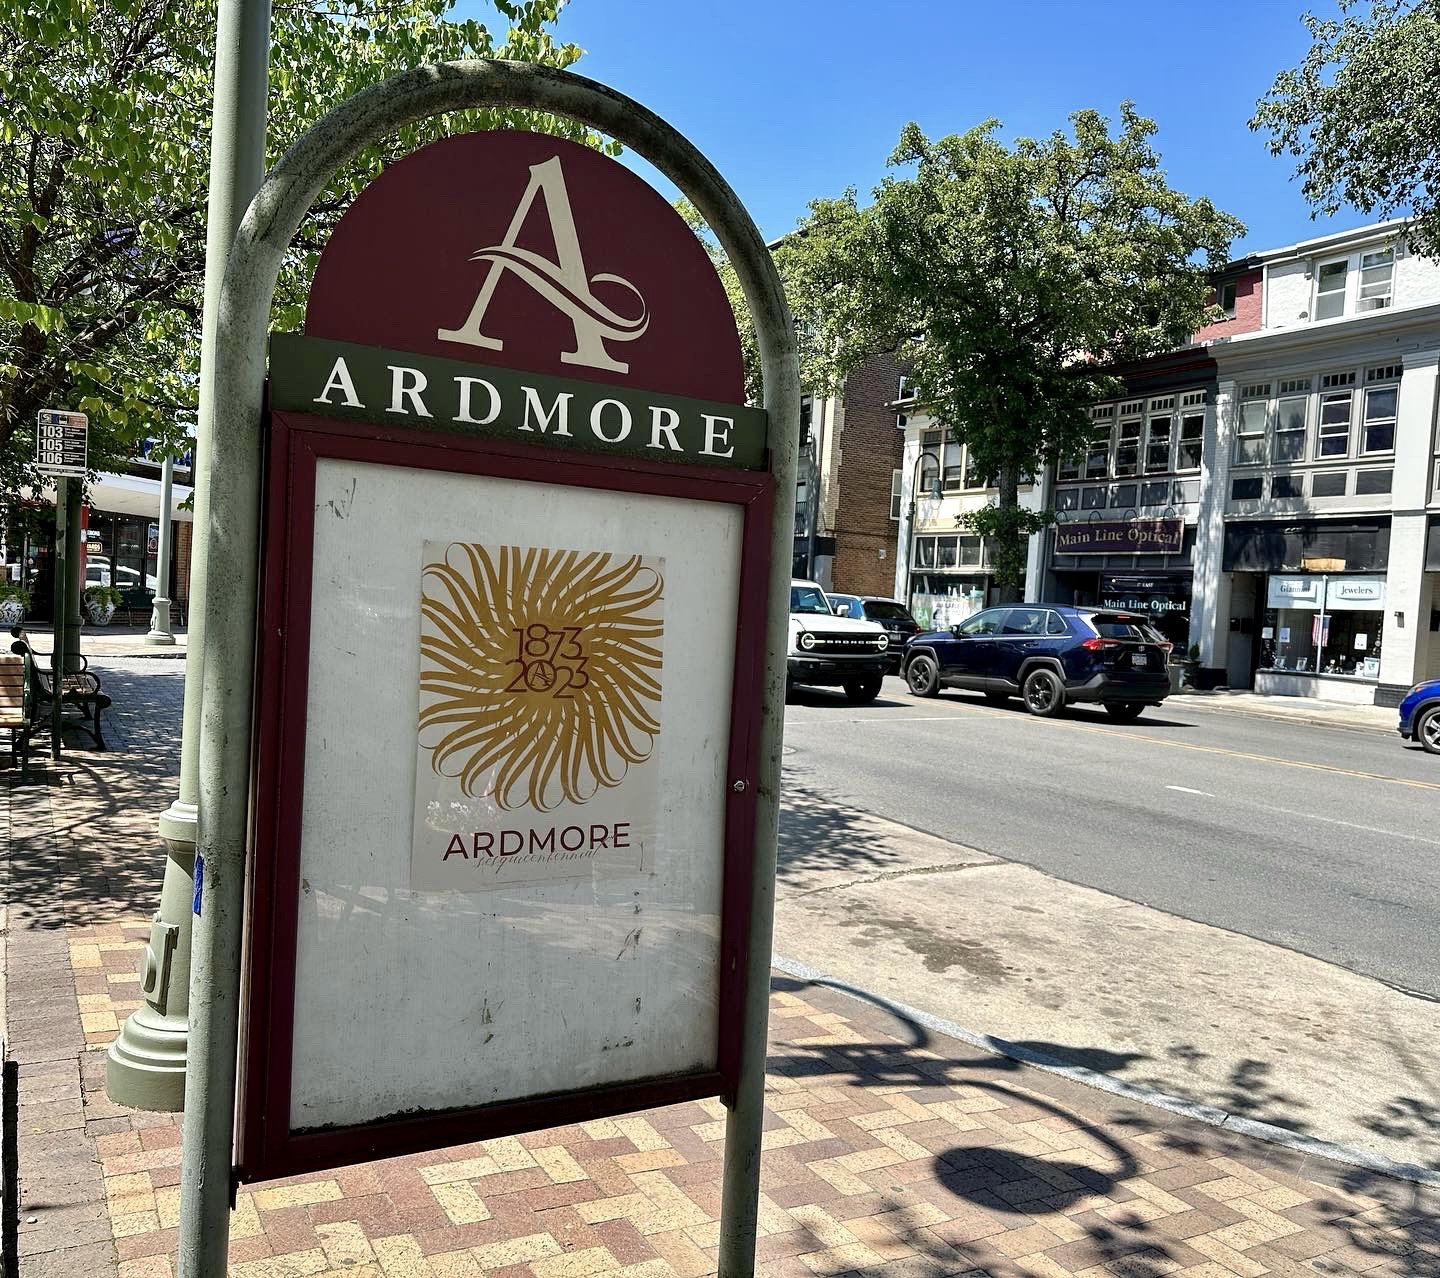 Ardmore Sesquicentennial poster in Schauffele Plaza, downtown Ardmore